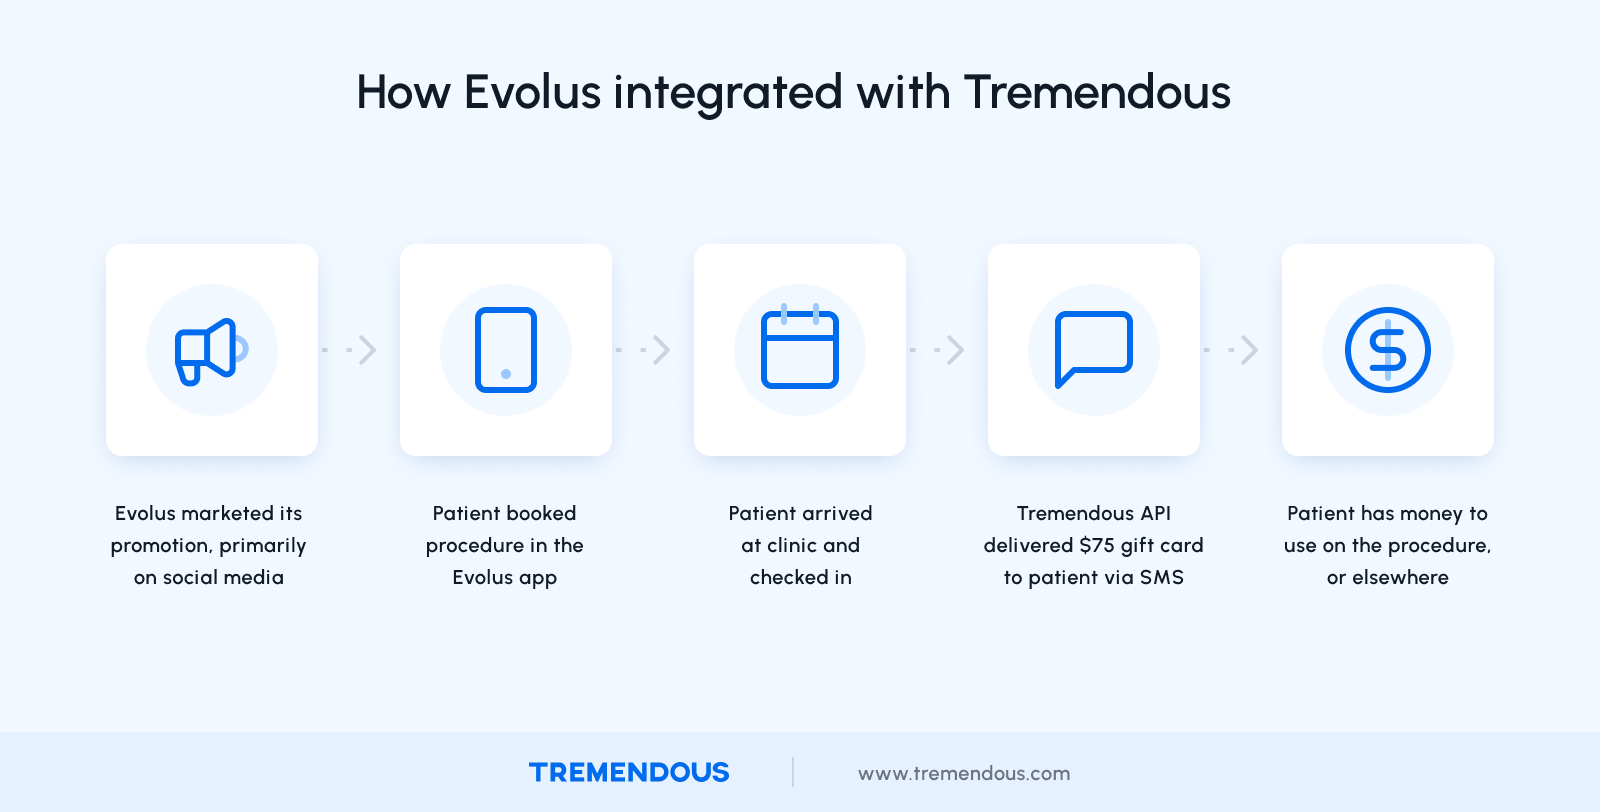 A description of how Evolus integrated with Tremendous.